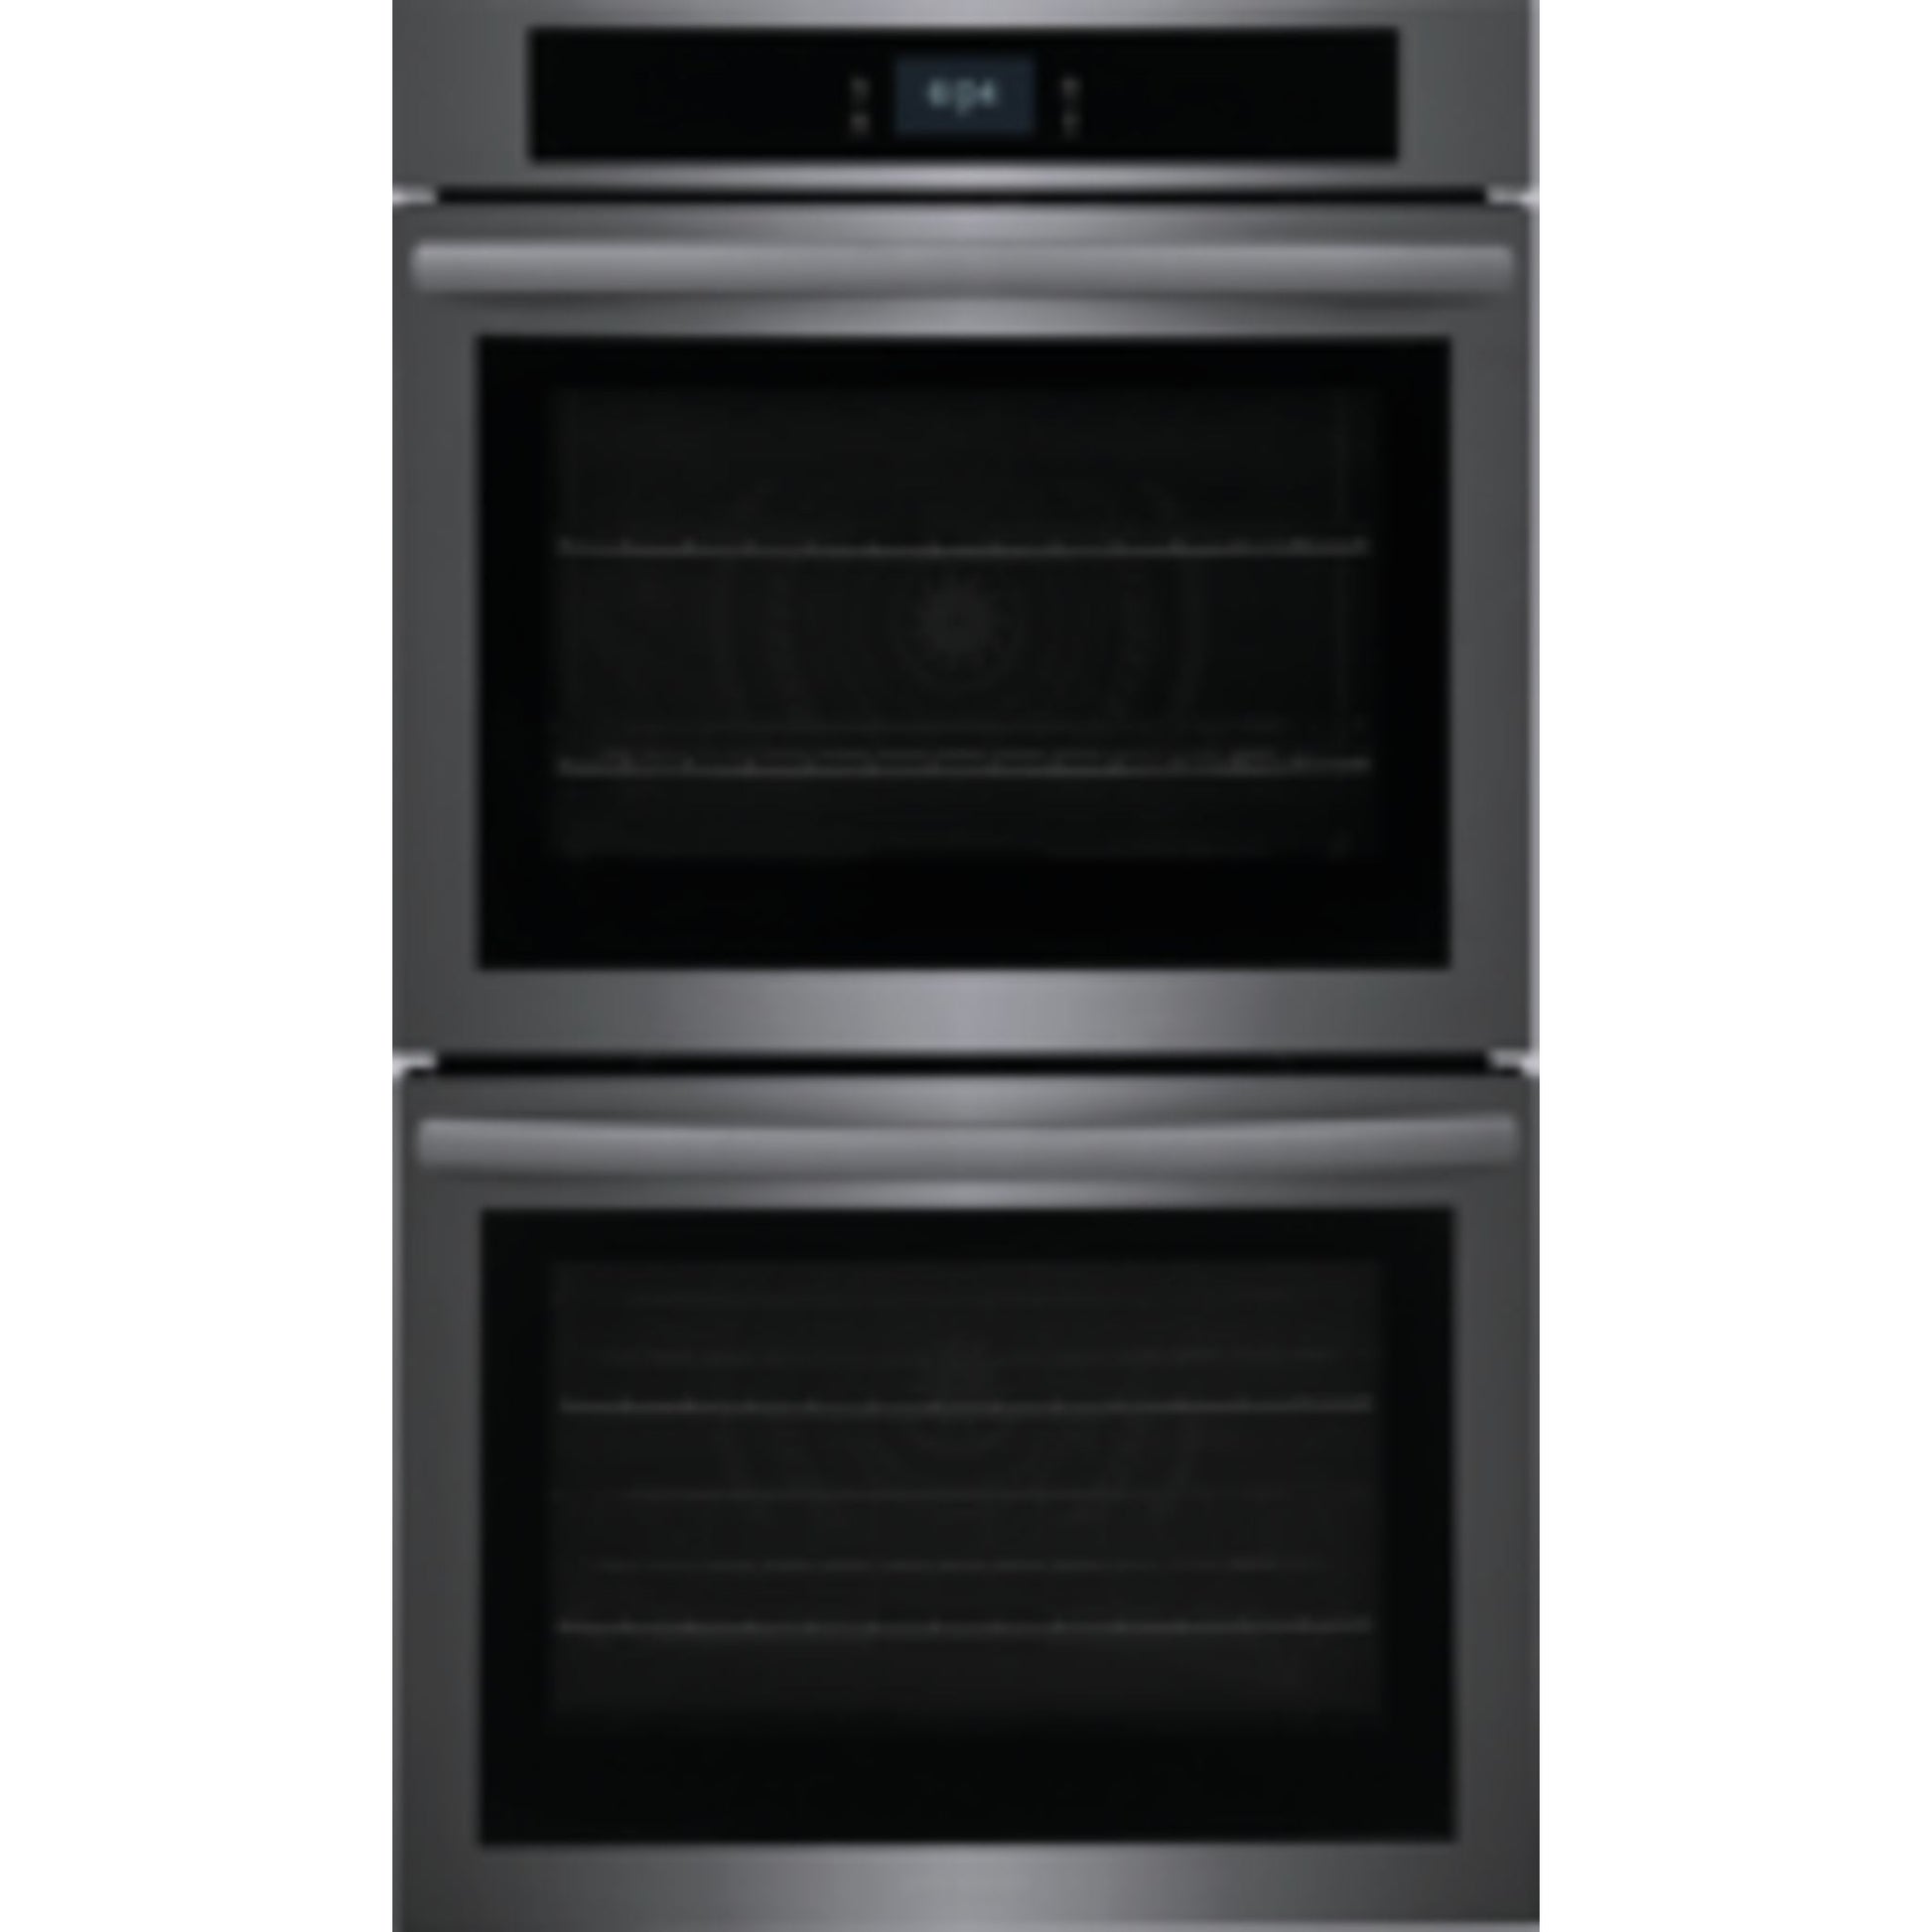 Frigidaire 30" Convection Wall Oven (FCWD3027AD) - Black Stainless